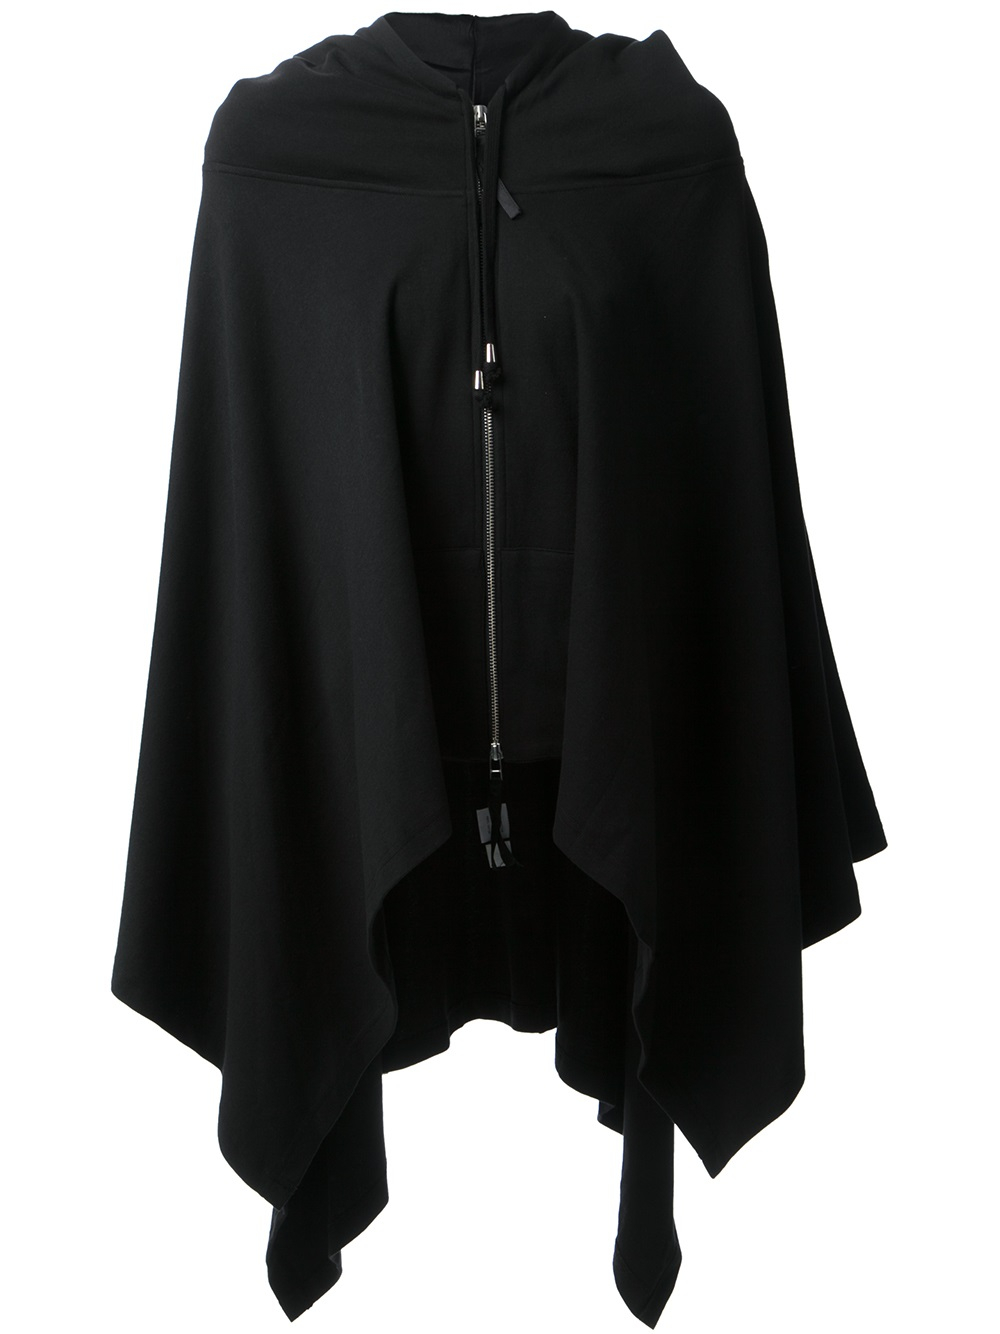 Lyst - Unconditional Poncho Hoodie in Black